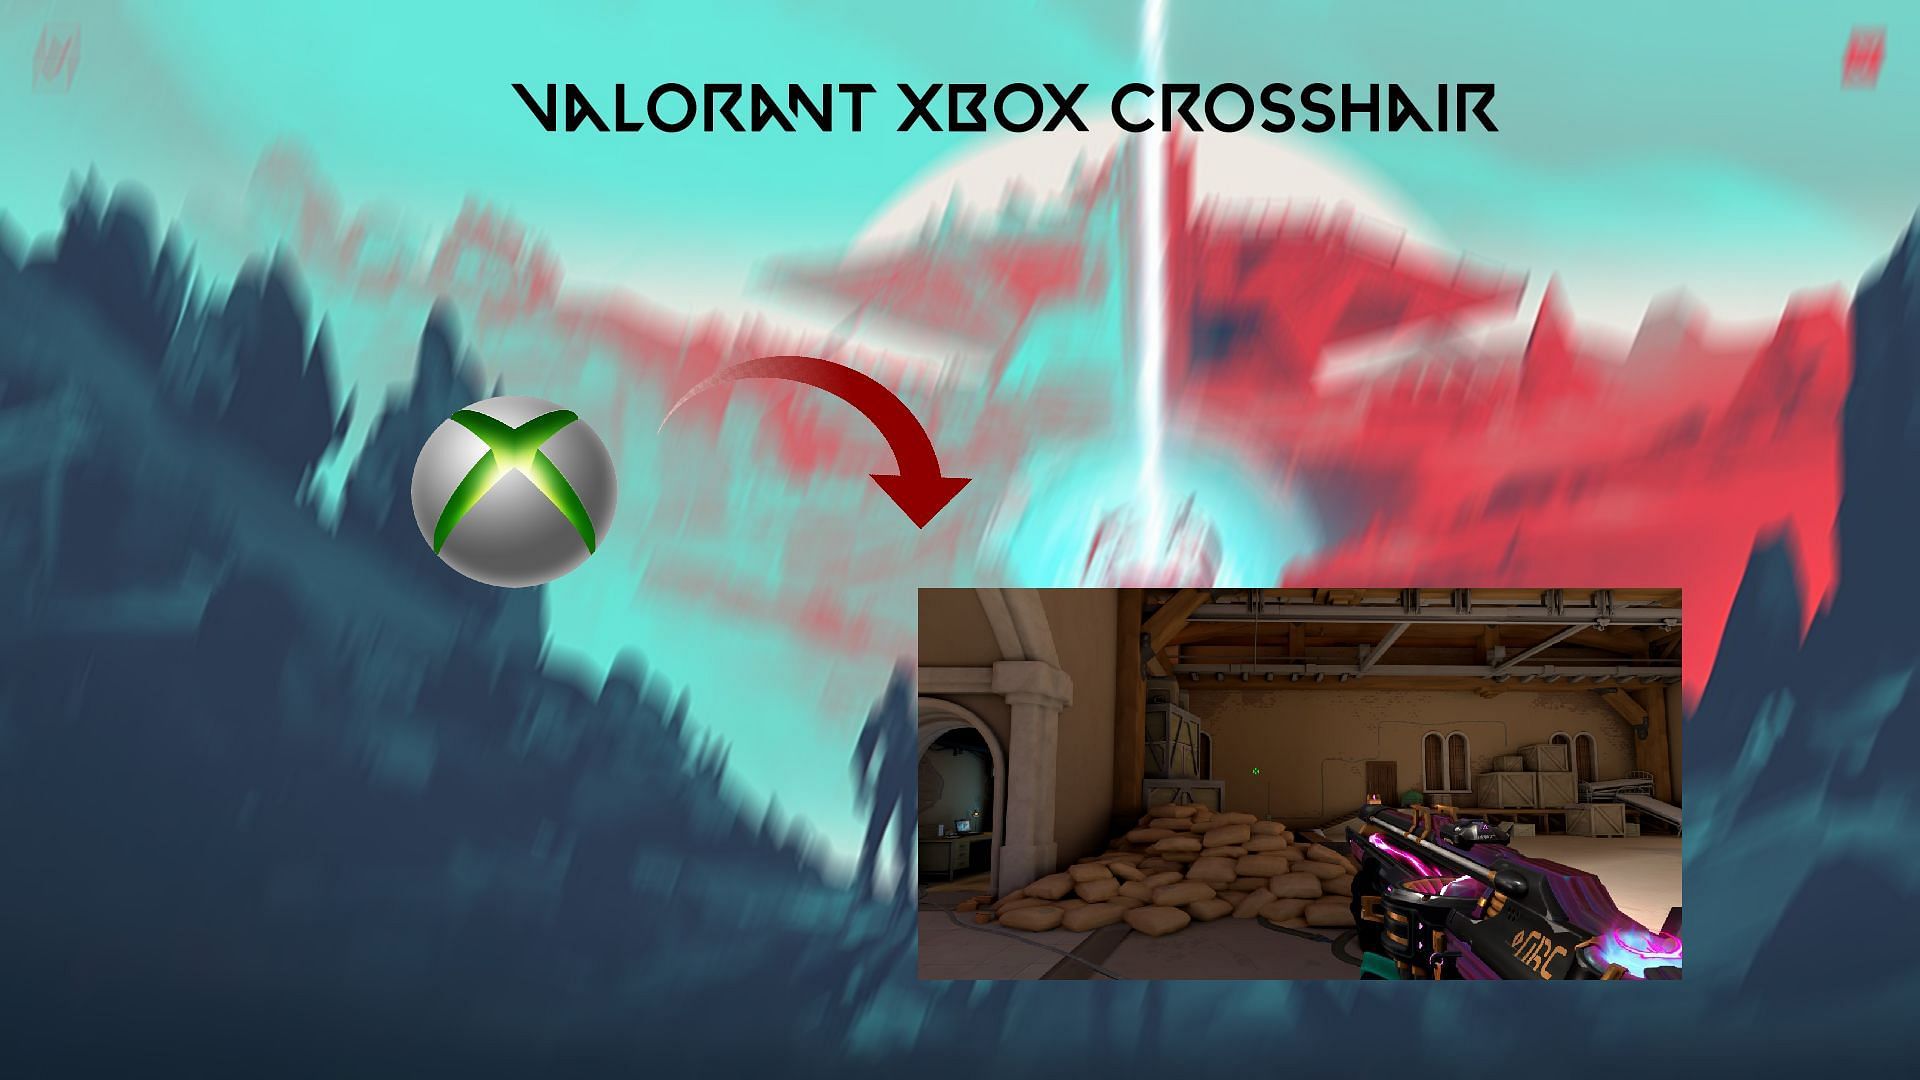 A complete guide to get the Xbox crosshair in Valorant (Image via Sportskeeda)